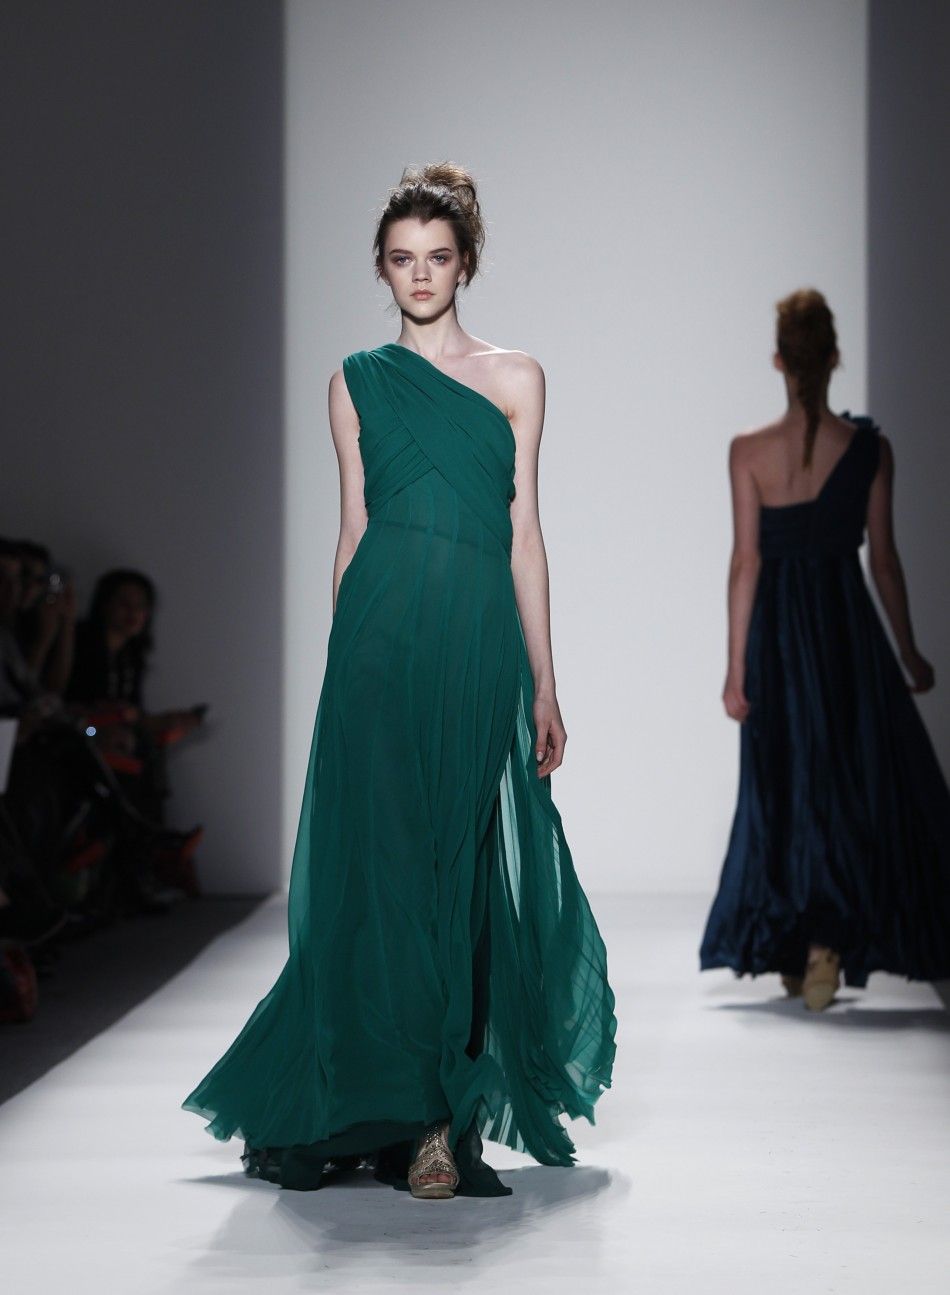 Best of New York Fashion Week 2012 Glamorous Evening Gowns and Chic Pumps PHOTOS